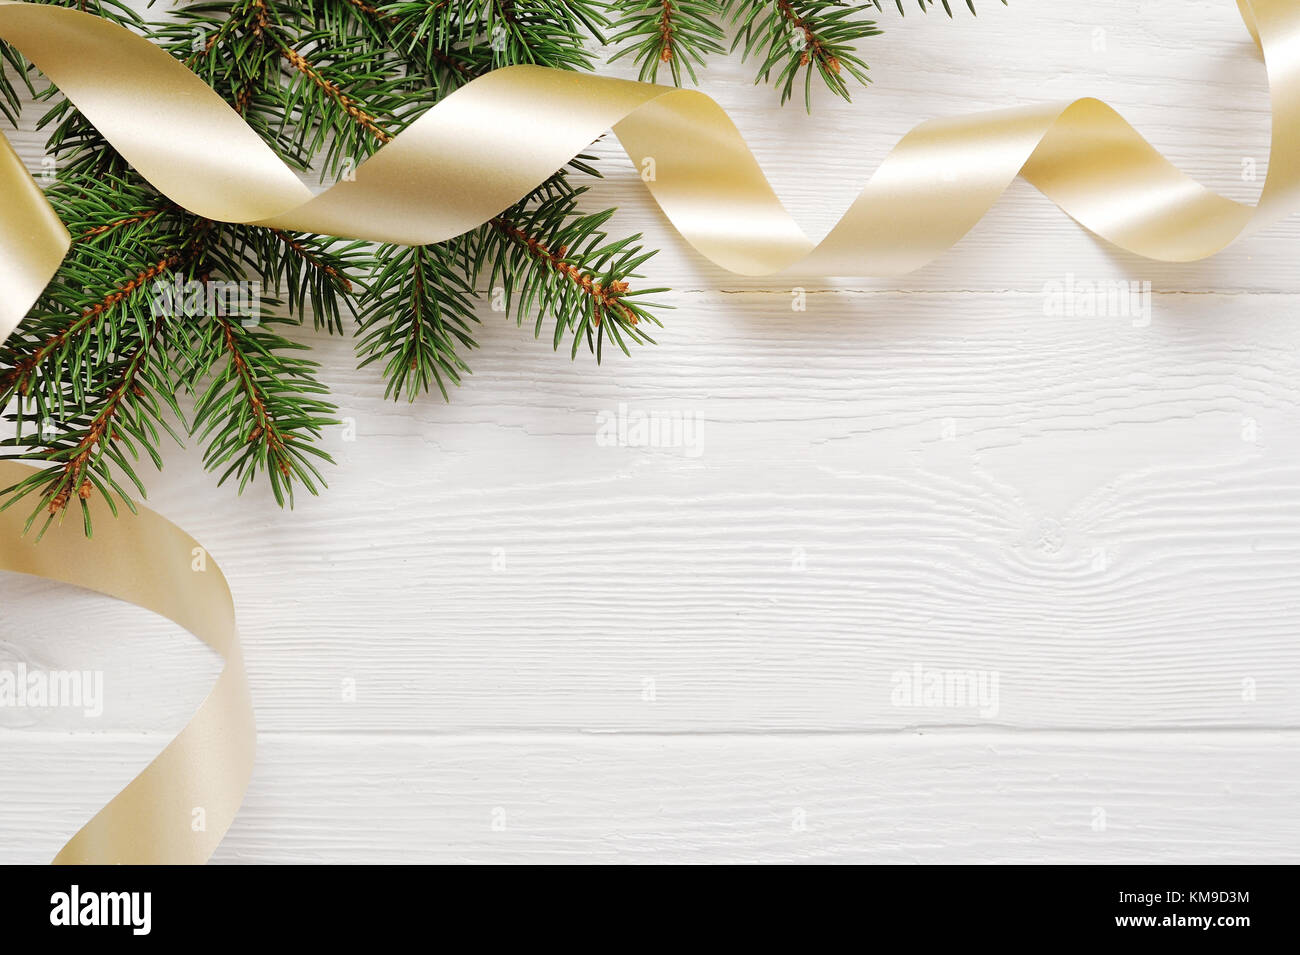 Mockup Christmas tree and gold ribbon, flatlay on a white wooden background, with place for your text Stock Photo